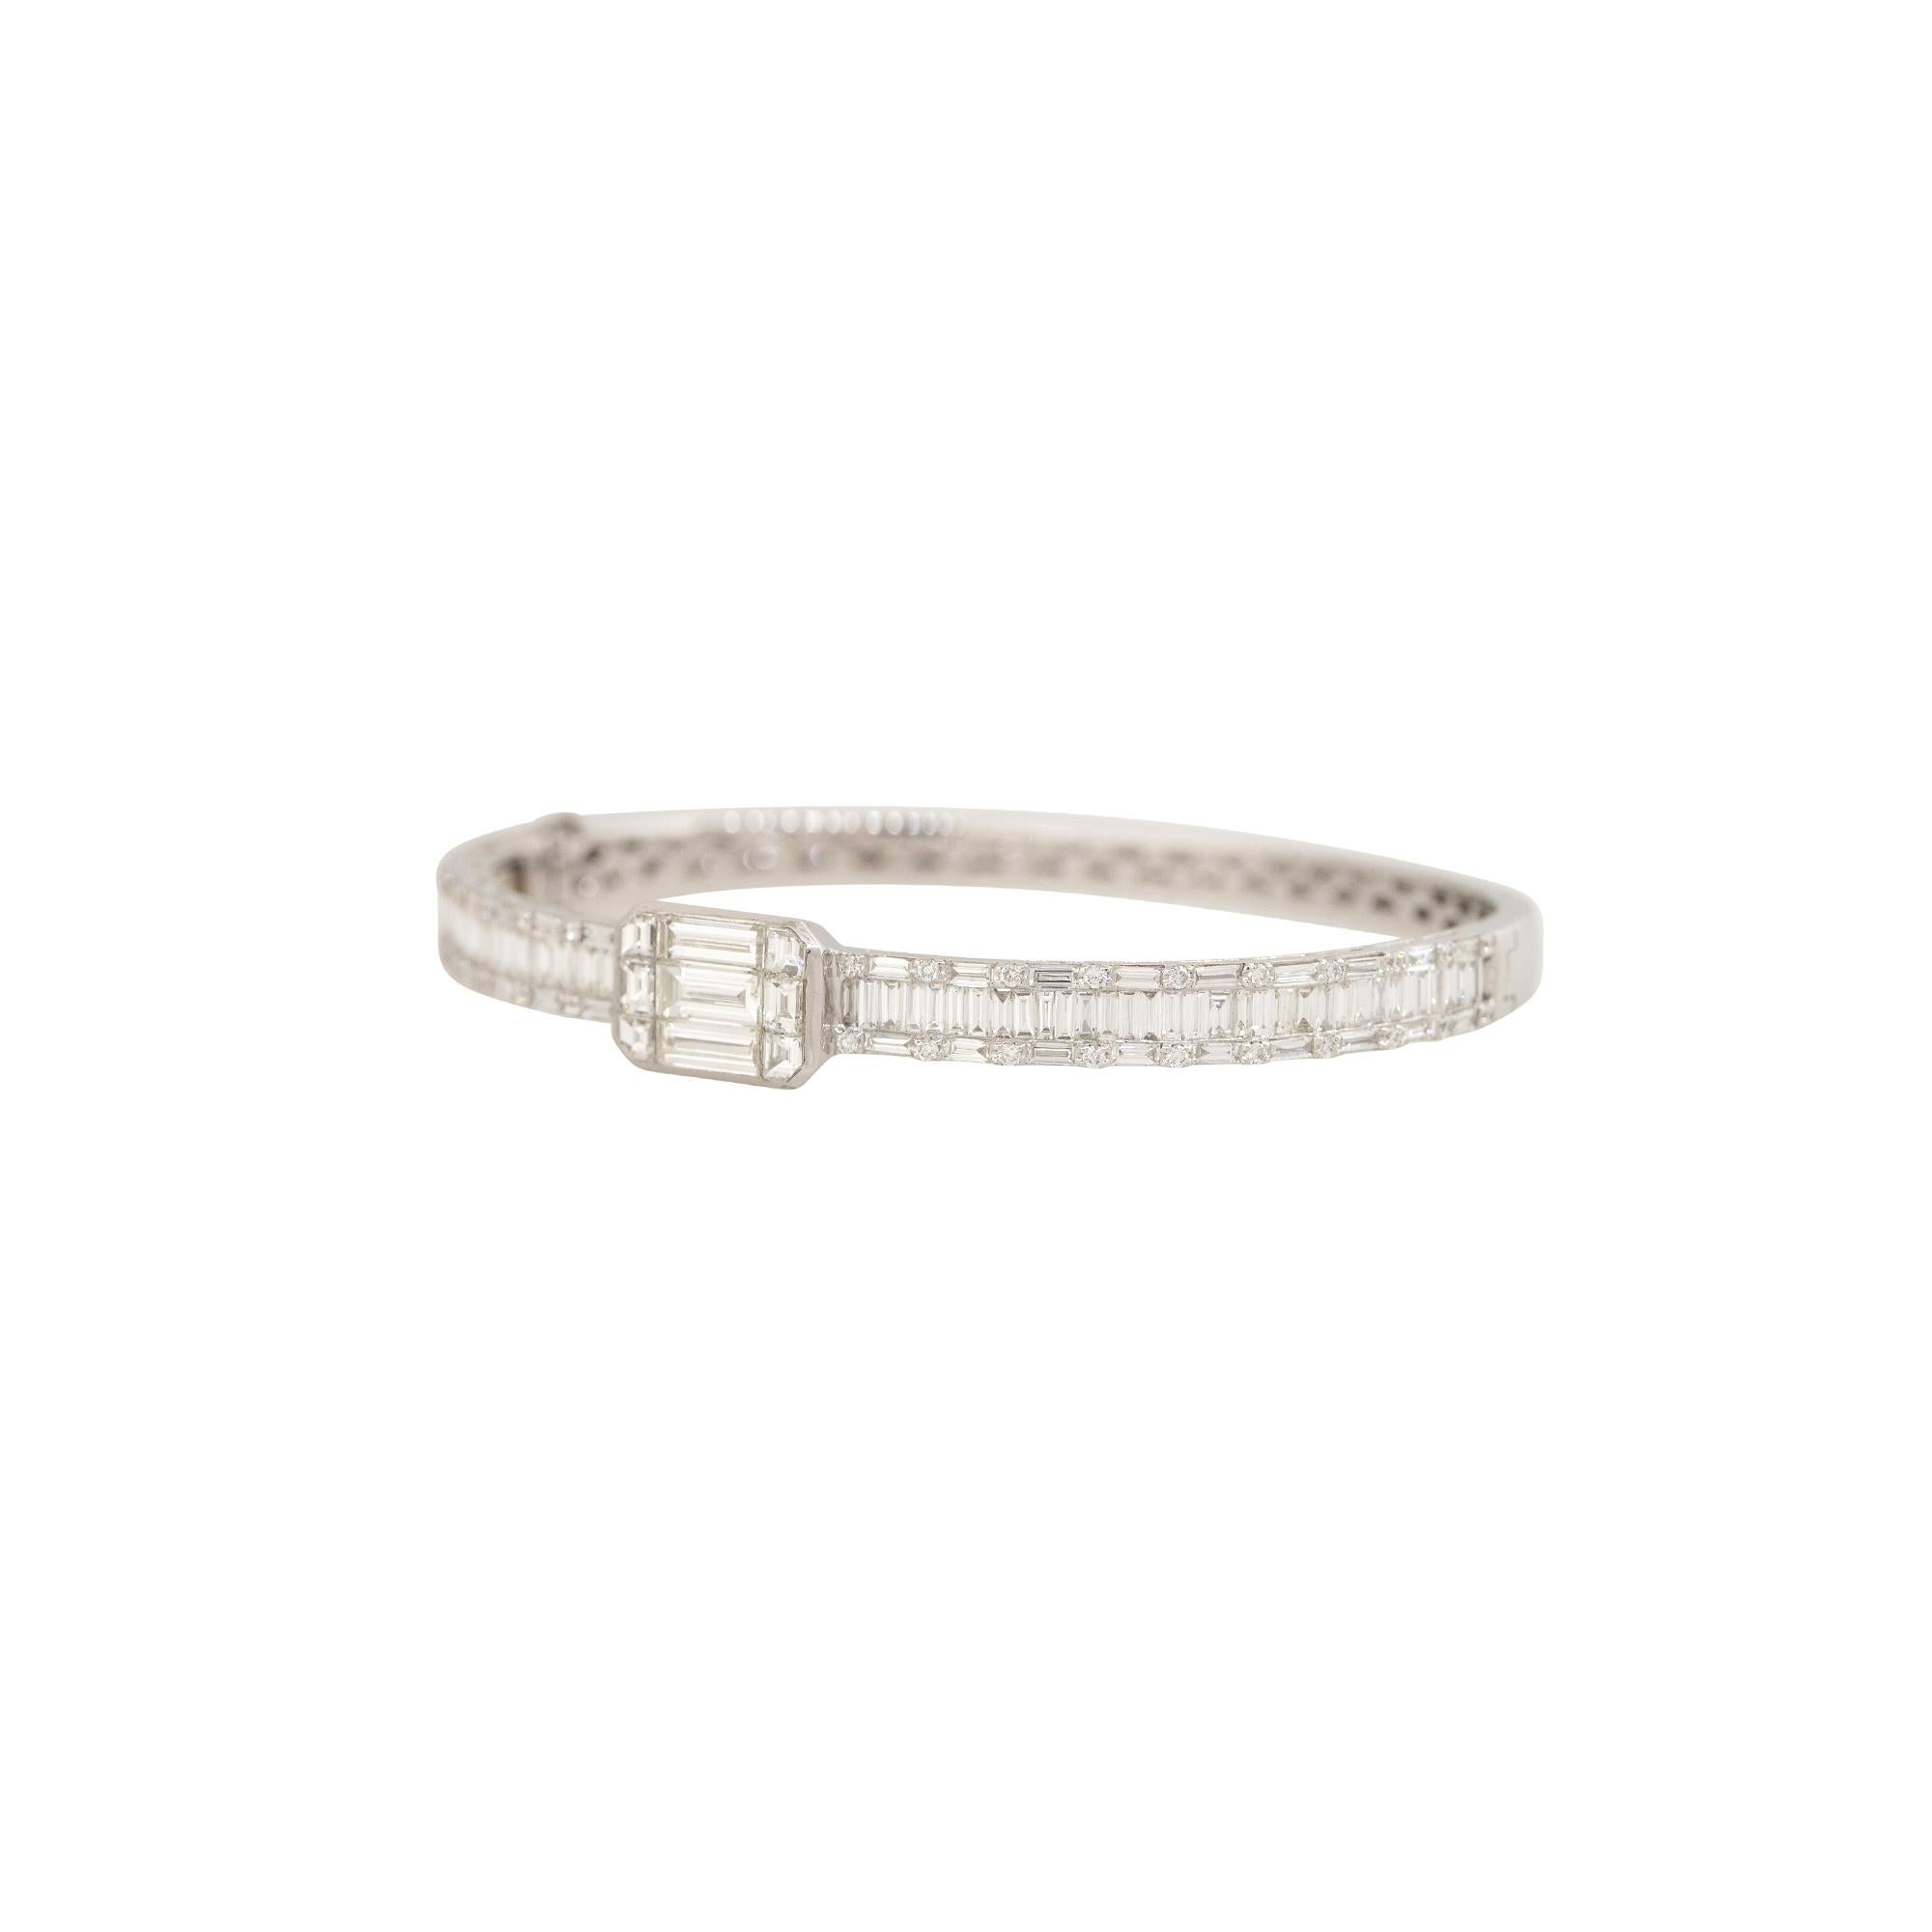 18k White Gold 3.78ctw Round Brilliant & Baguette Cut Diamond Square Station Bangle

Material: 18k White Gold
Diamond Details: There are approximately 0.28 carats of round brilliant cut diamonds (38 stones) and approximately 3.50 carats of baguette